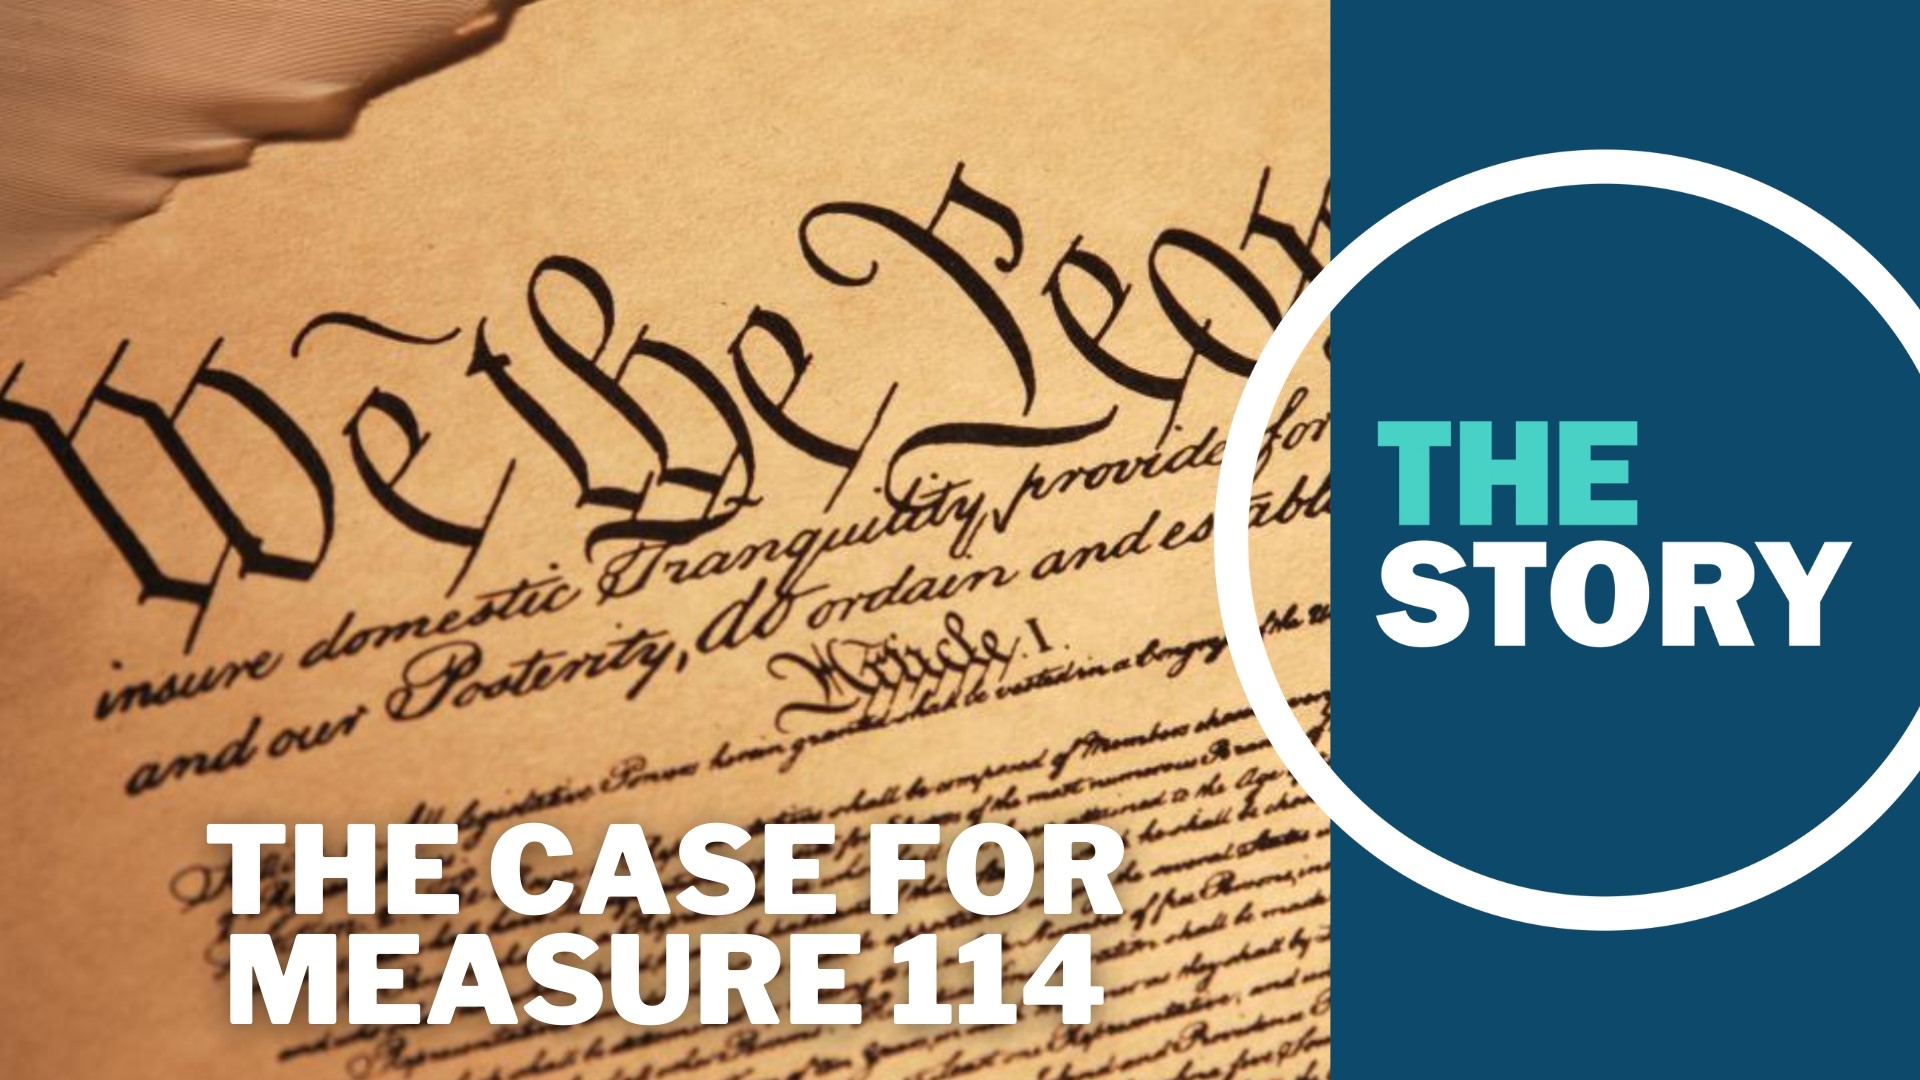 Measure 114 is now being challenged in court. We asked a constitutional law professor how he thought the case could be decided.